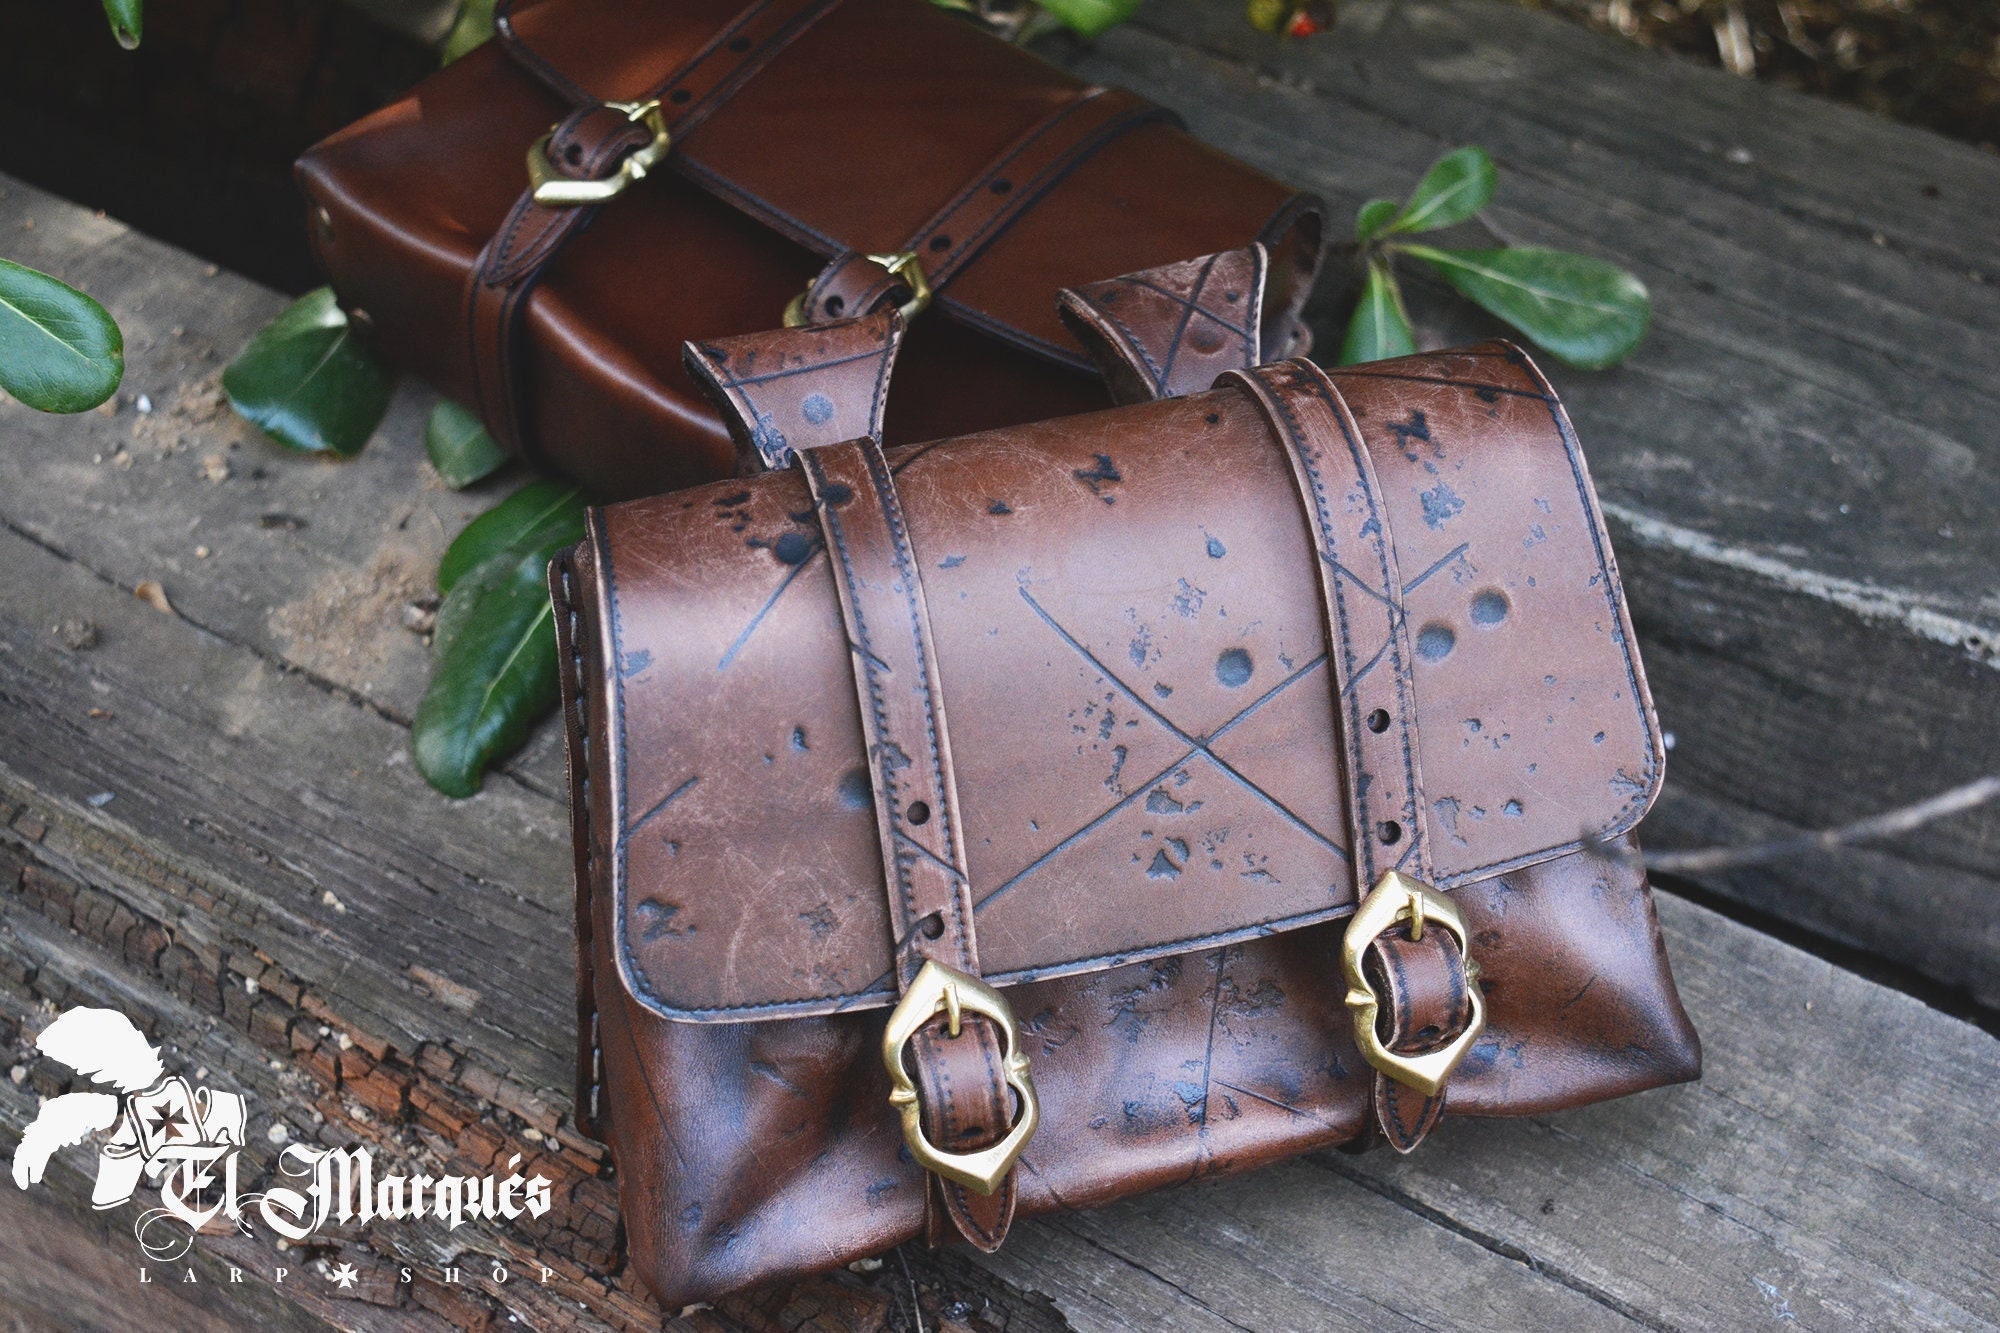 Brown Leather Pouch - HW-701160 - LARP Distribution